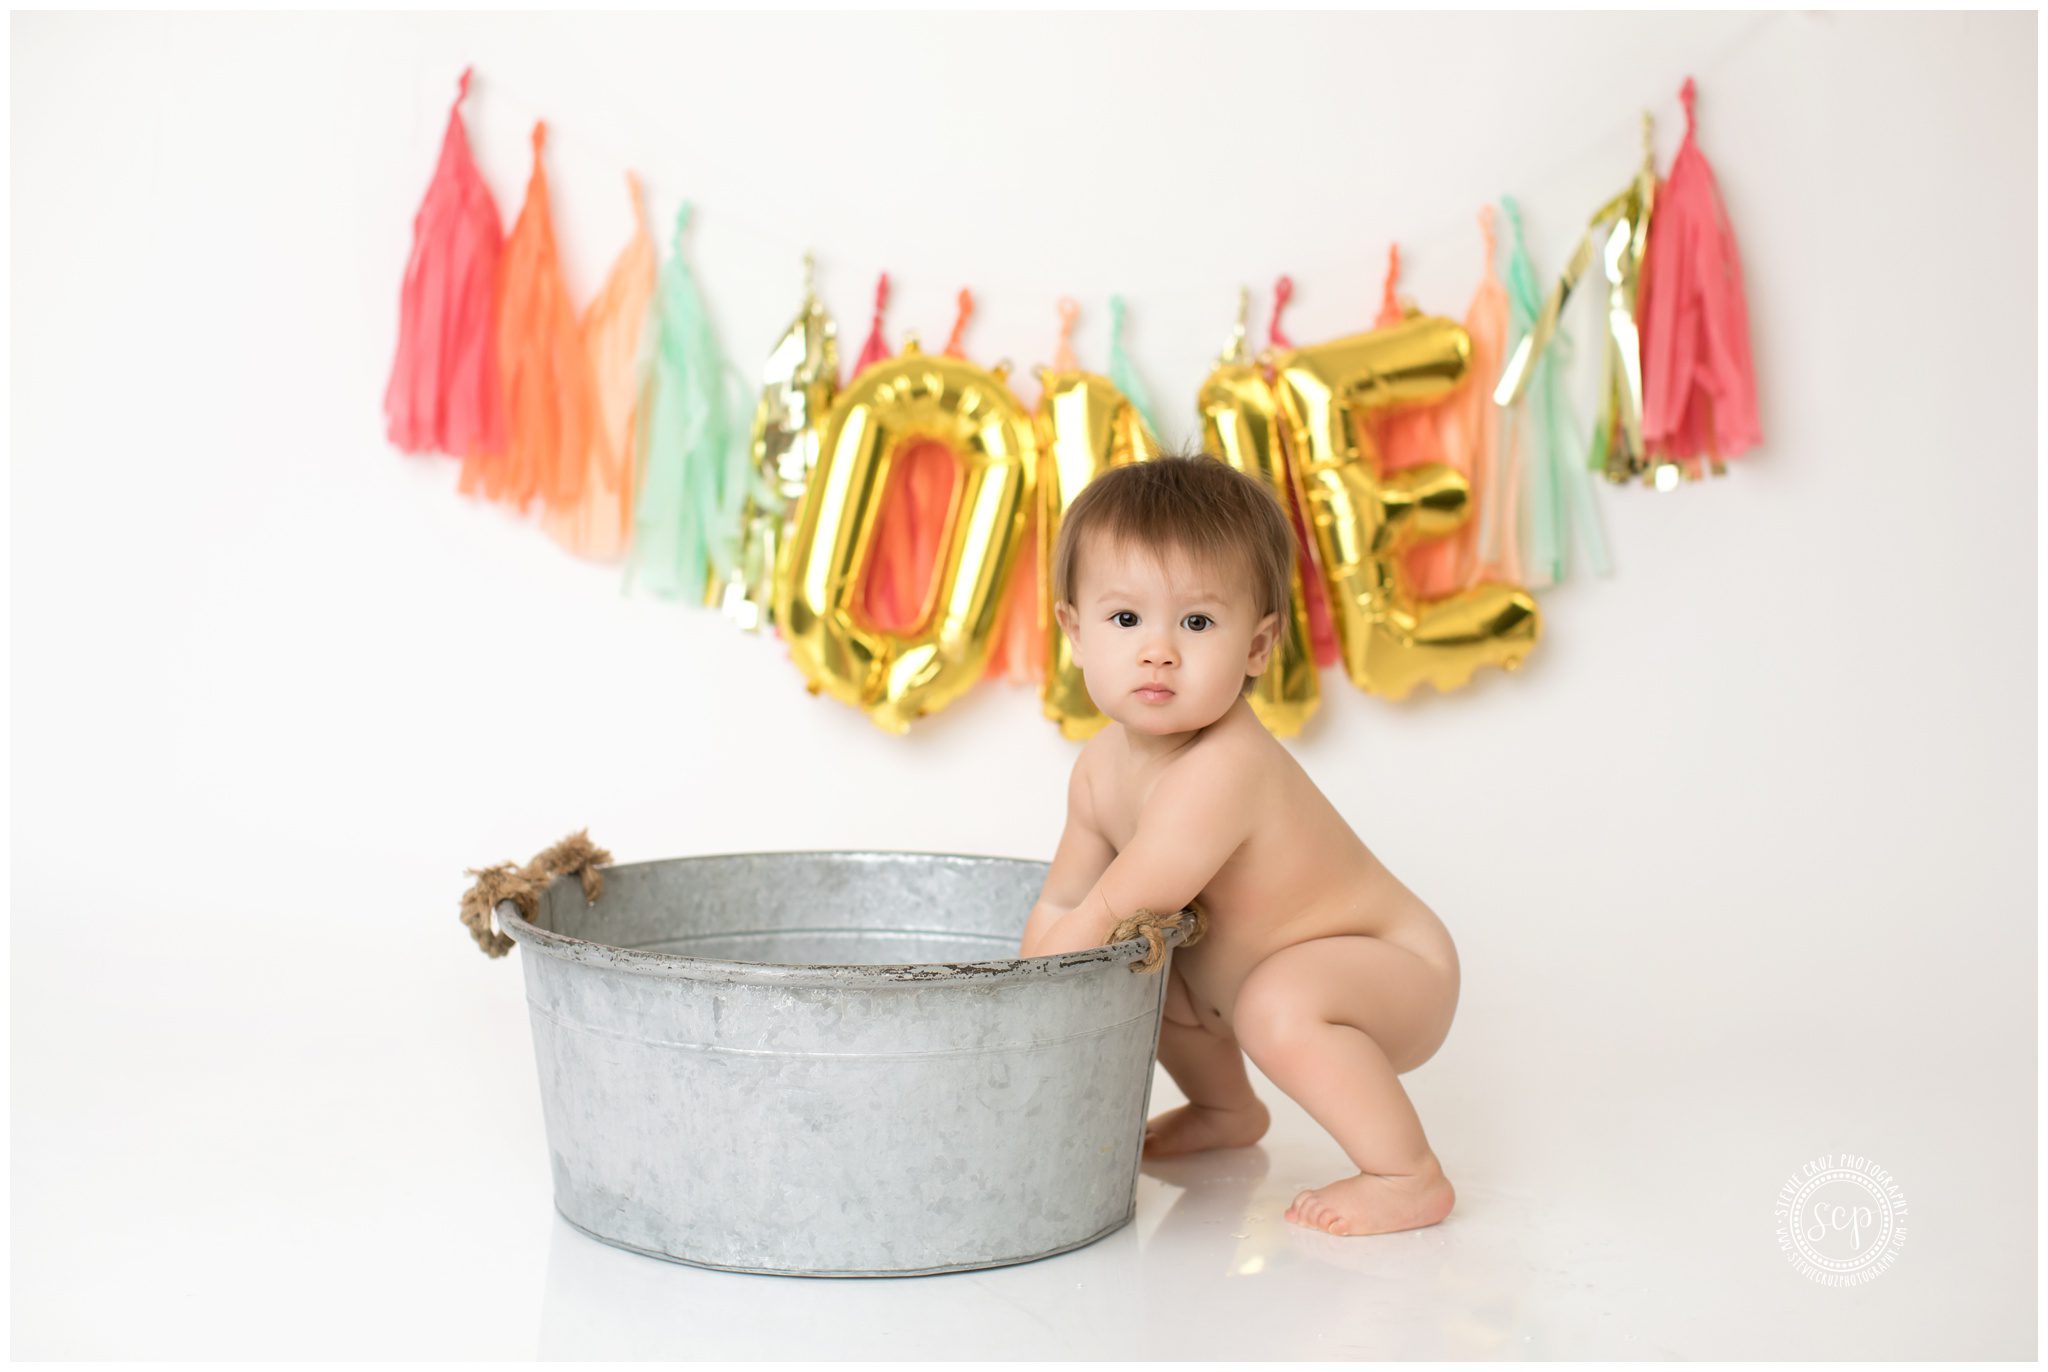 Love the props and one year gold gold balloon decor for this one year old birthday photo session taken in Orange County